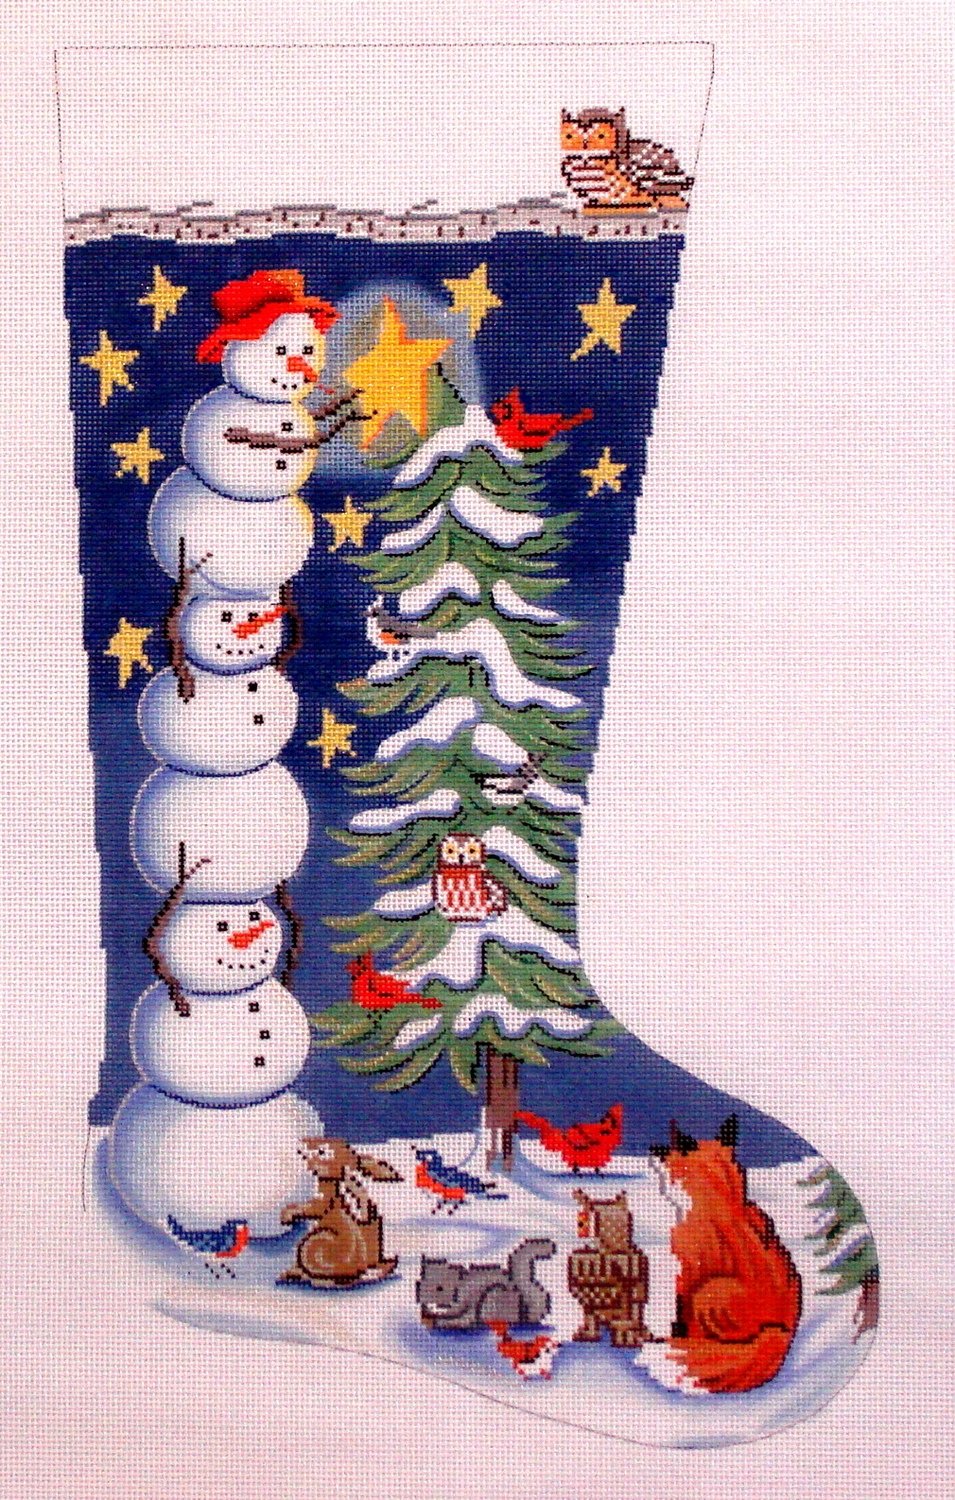 Tree Trimming Snowman Stocking   (Handpainted by Alice Peterson)